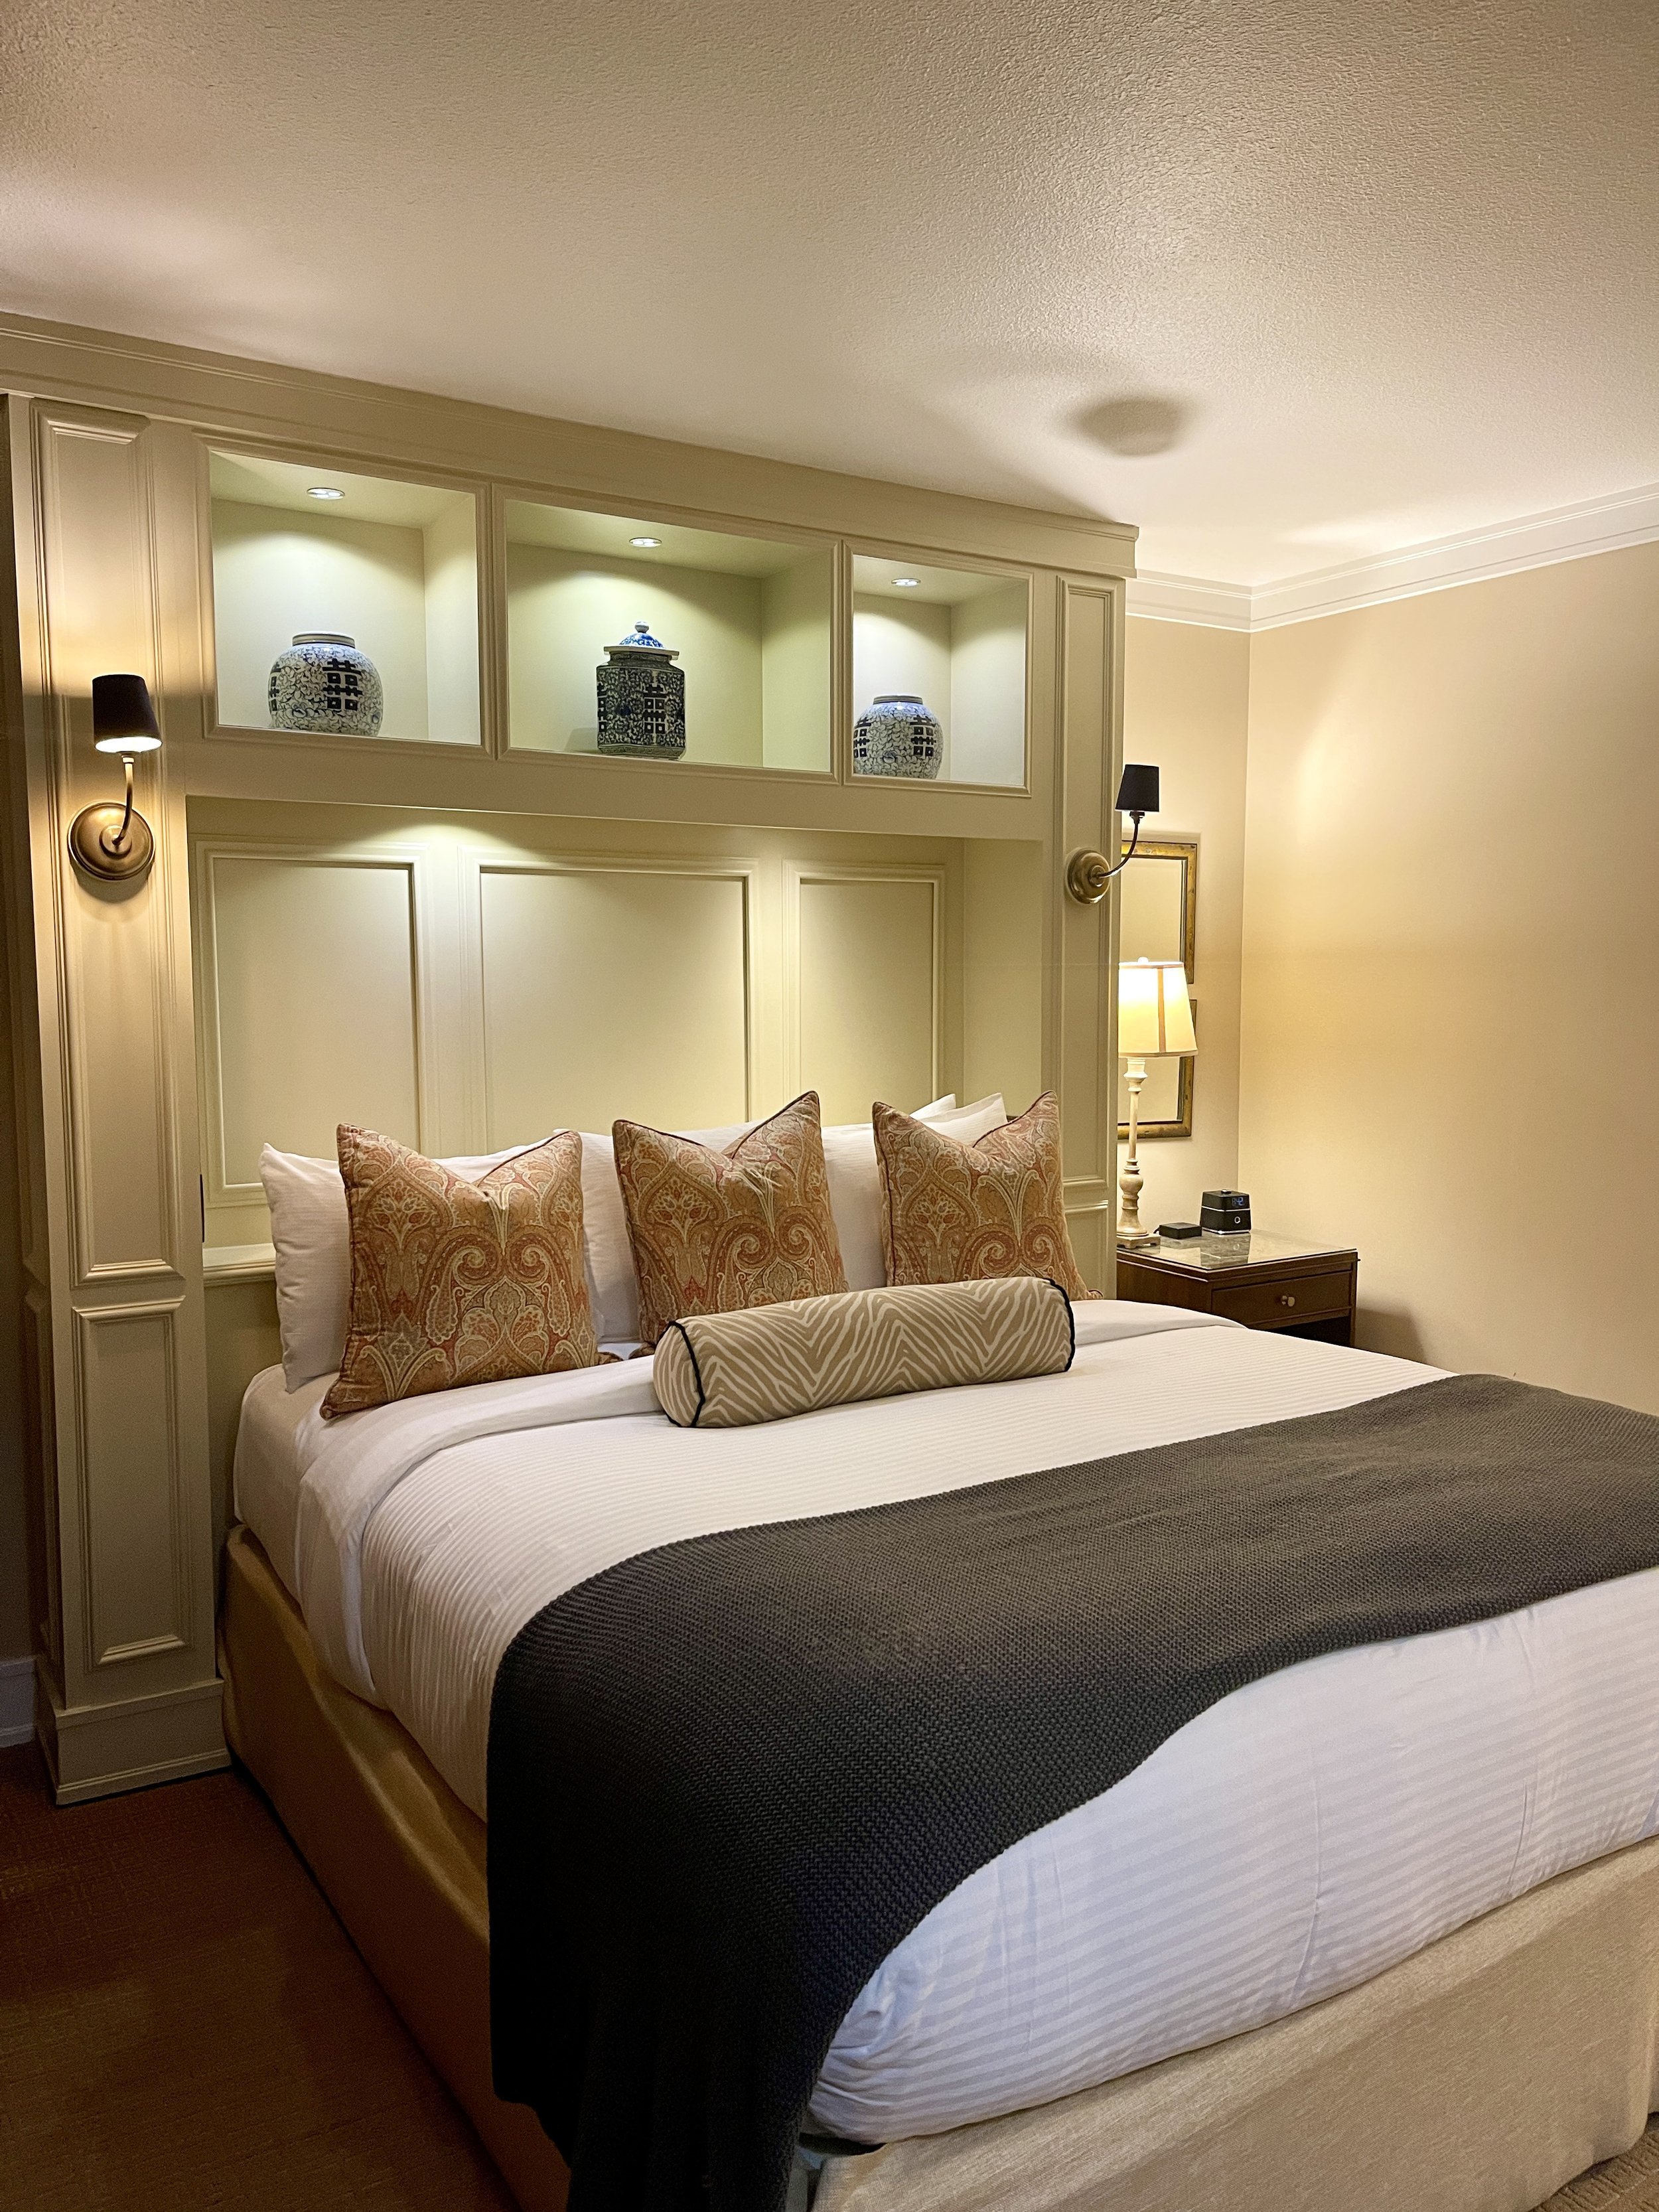 downtown napa hotels luxury with spa - this Napa River Inn Review will tell you all about one of the best downtown Napa hotels. Napa River Inn is a luxurious, boutique hotel with amazing river views and guest rooms.